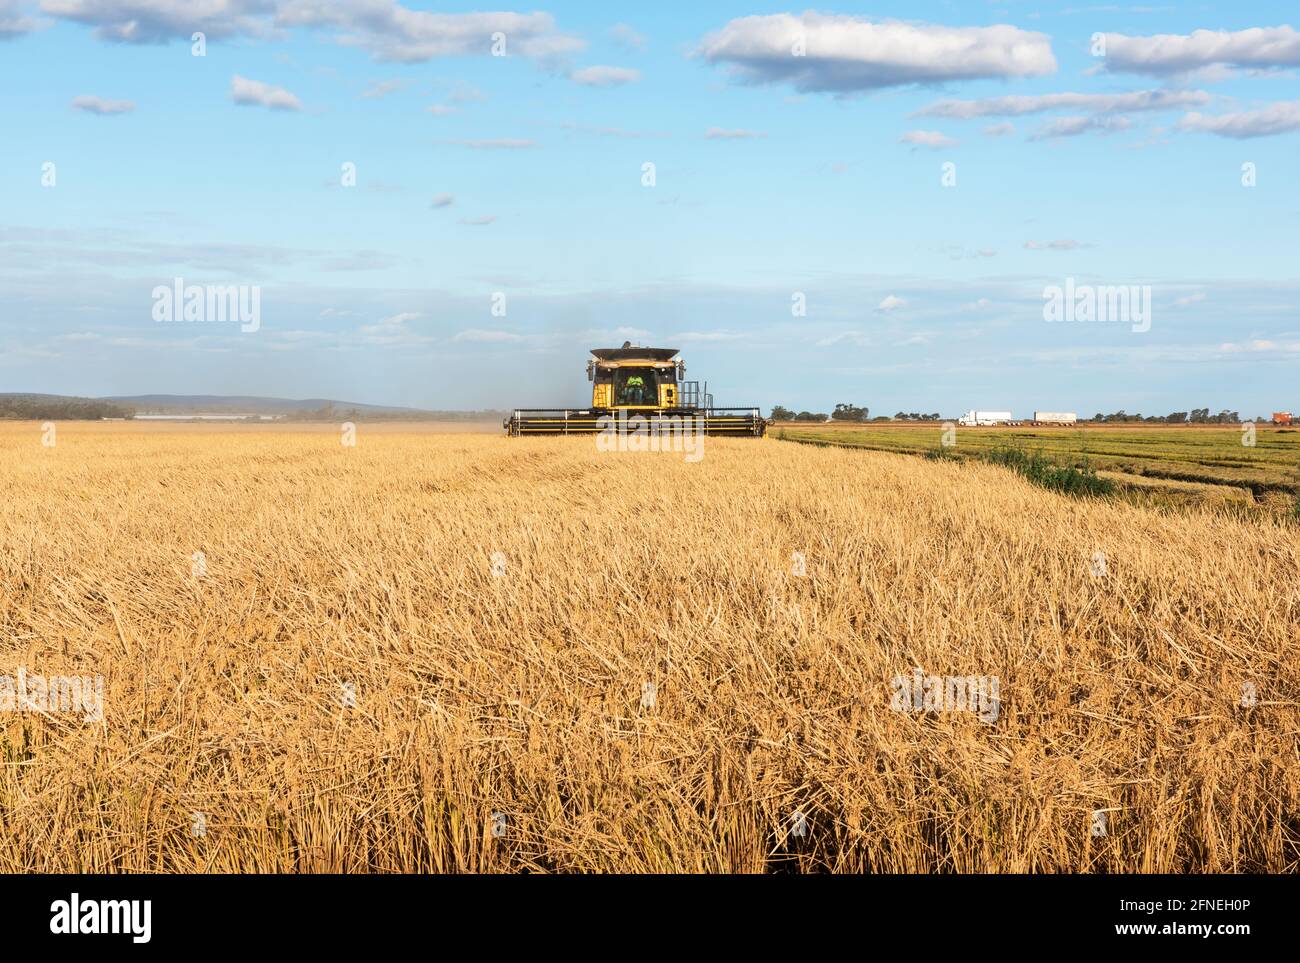 Harvesting Rice on the farm near Griffith in New South Wales, Australia Stock Photo